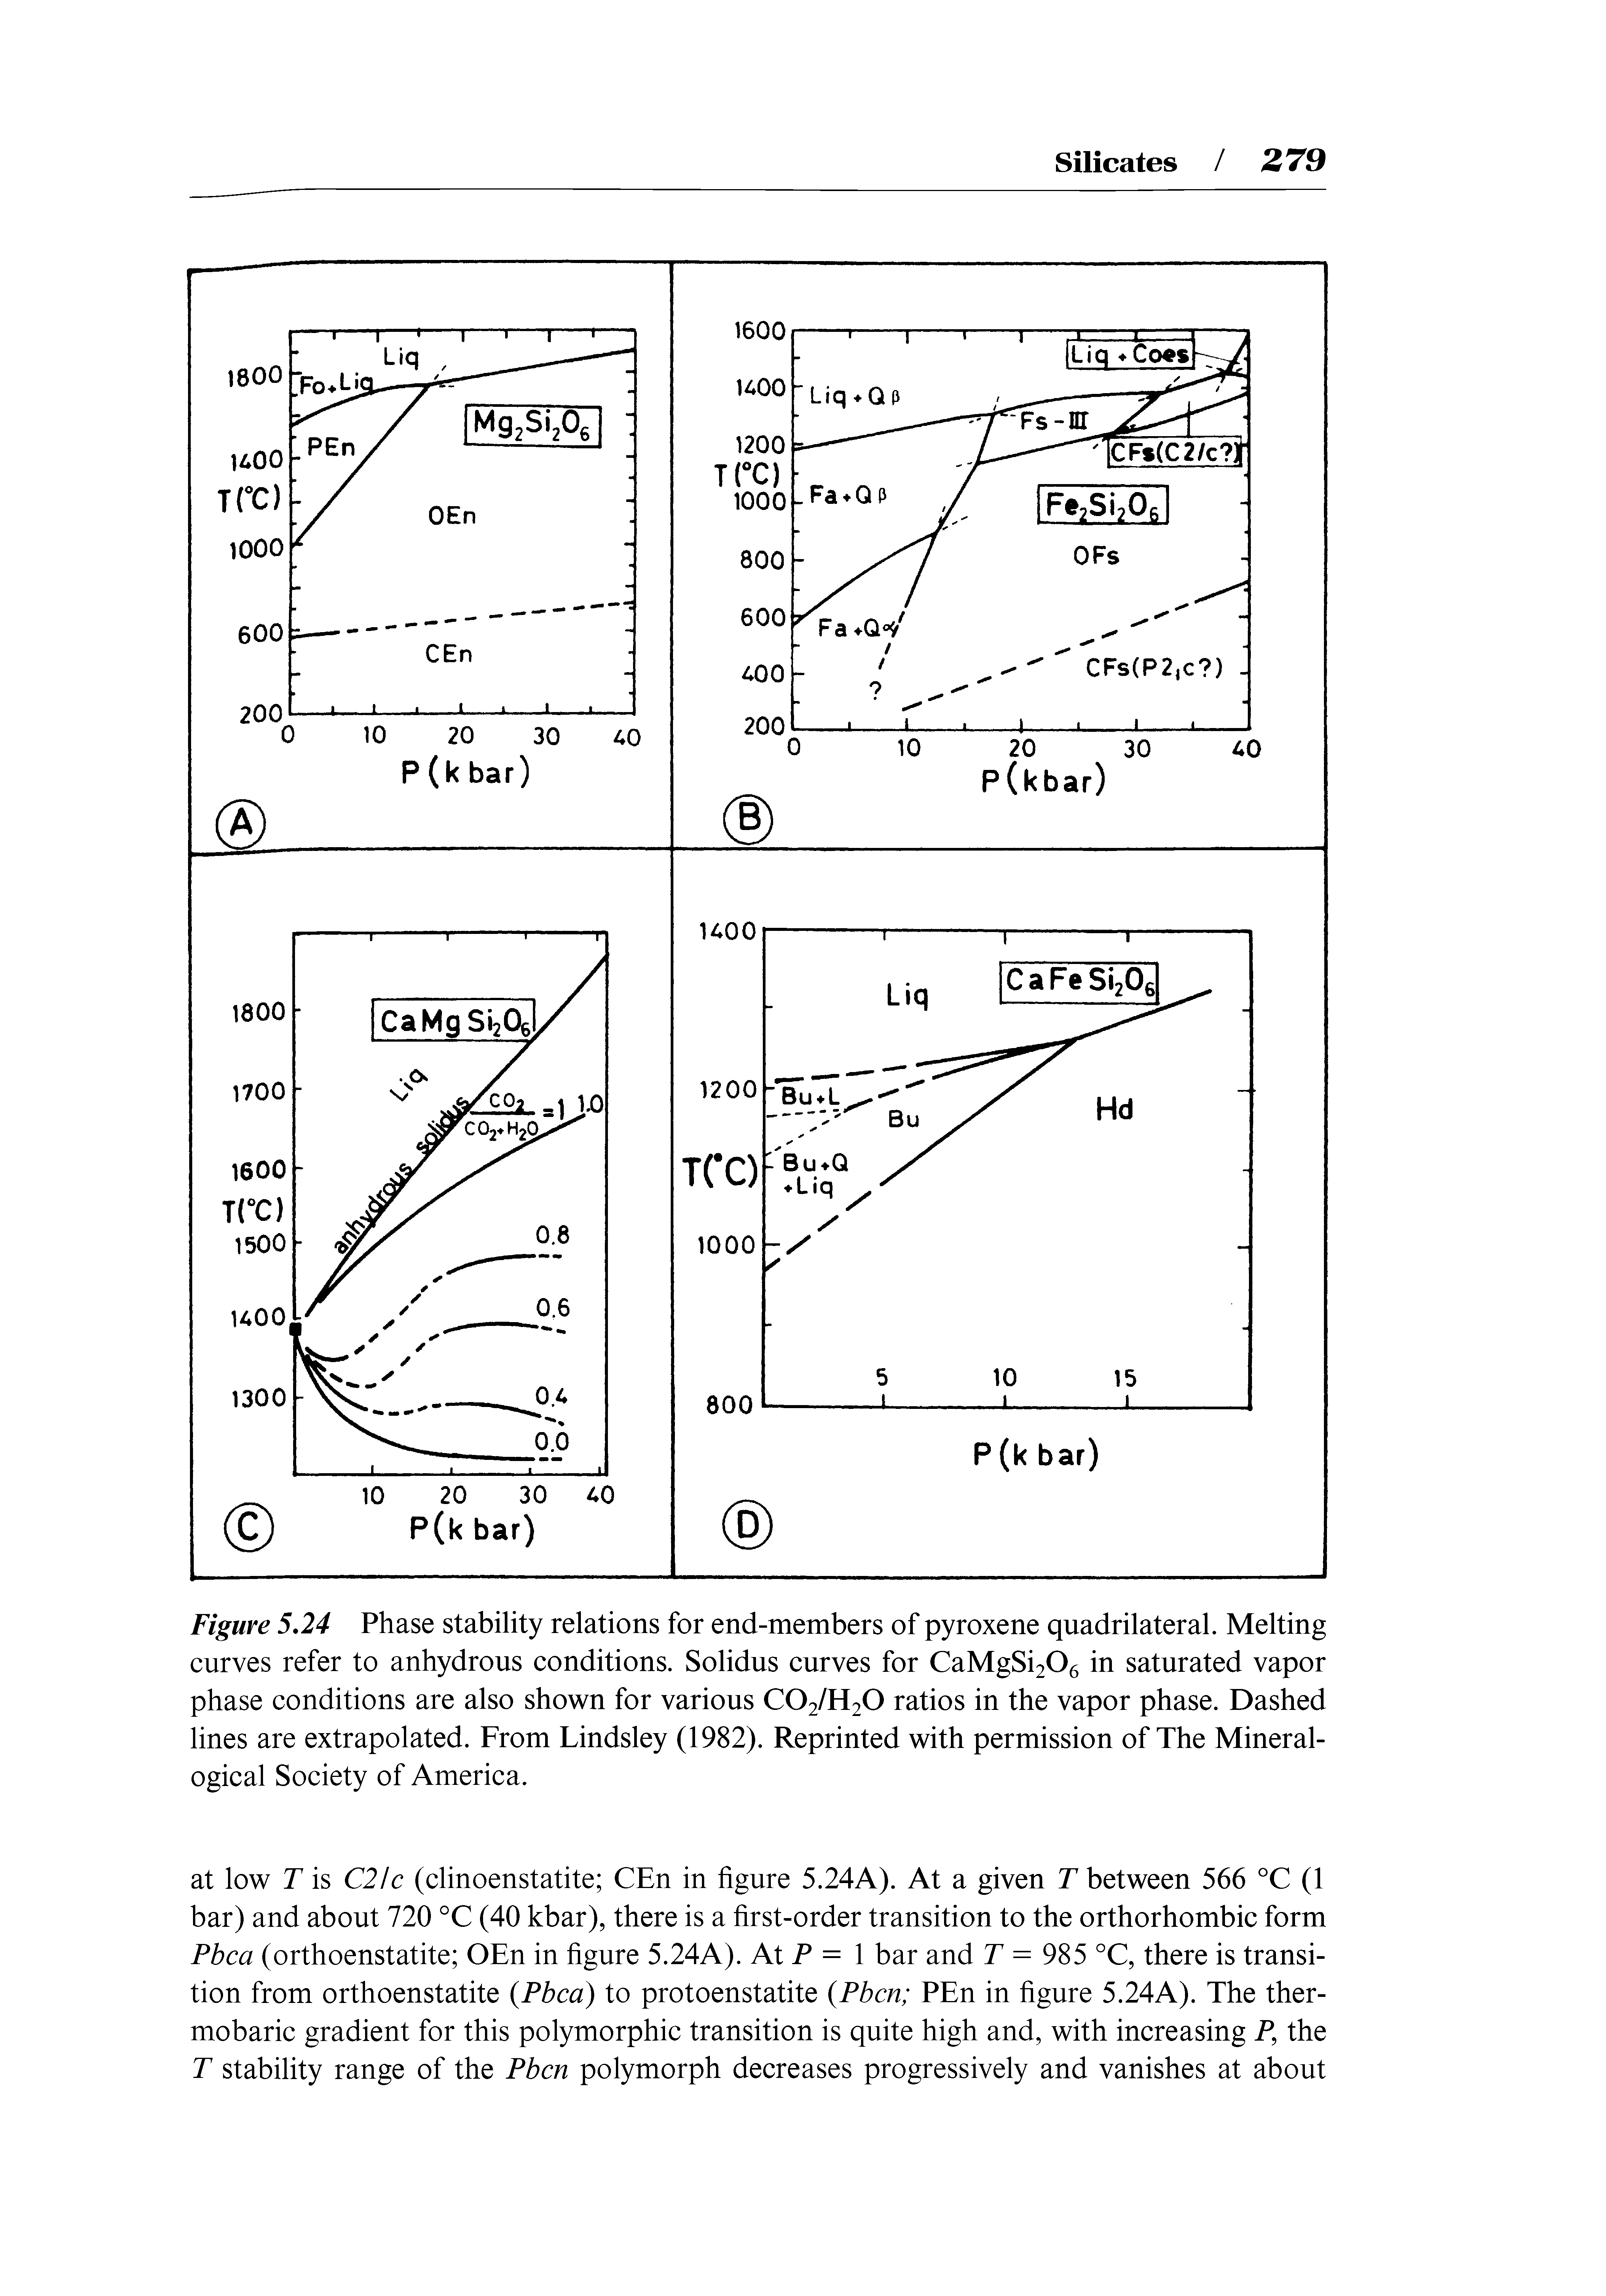 Figure 5.24 Phase stability relations for end-members of pyroxene quadrilateral. Melting curves refer to anhydrous conditions. Solidus curves for CaMgSi206 in saturated vapor phase conditions are also shown for various CO2/H2O ratios in the vapor phase. Dashed lines are extrapolated. From Lindsley (1982). Reprinted with permission of The Mineral-ogical Society of America.